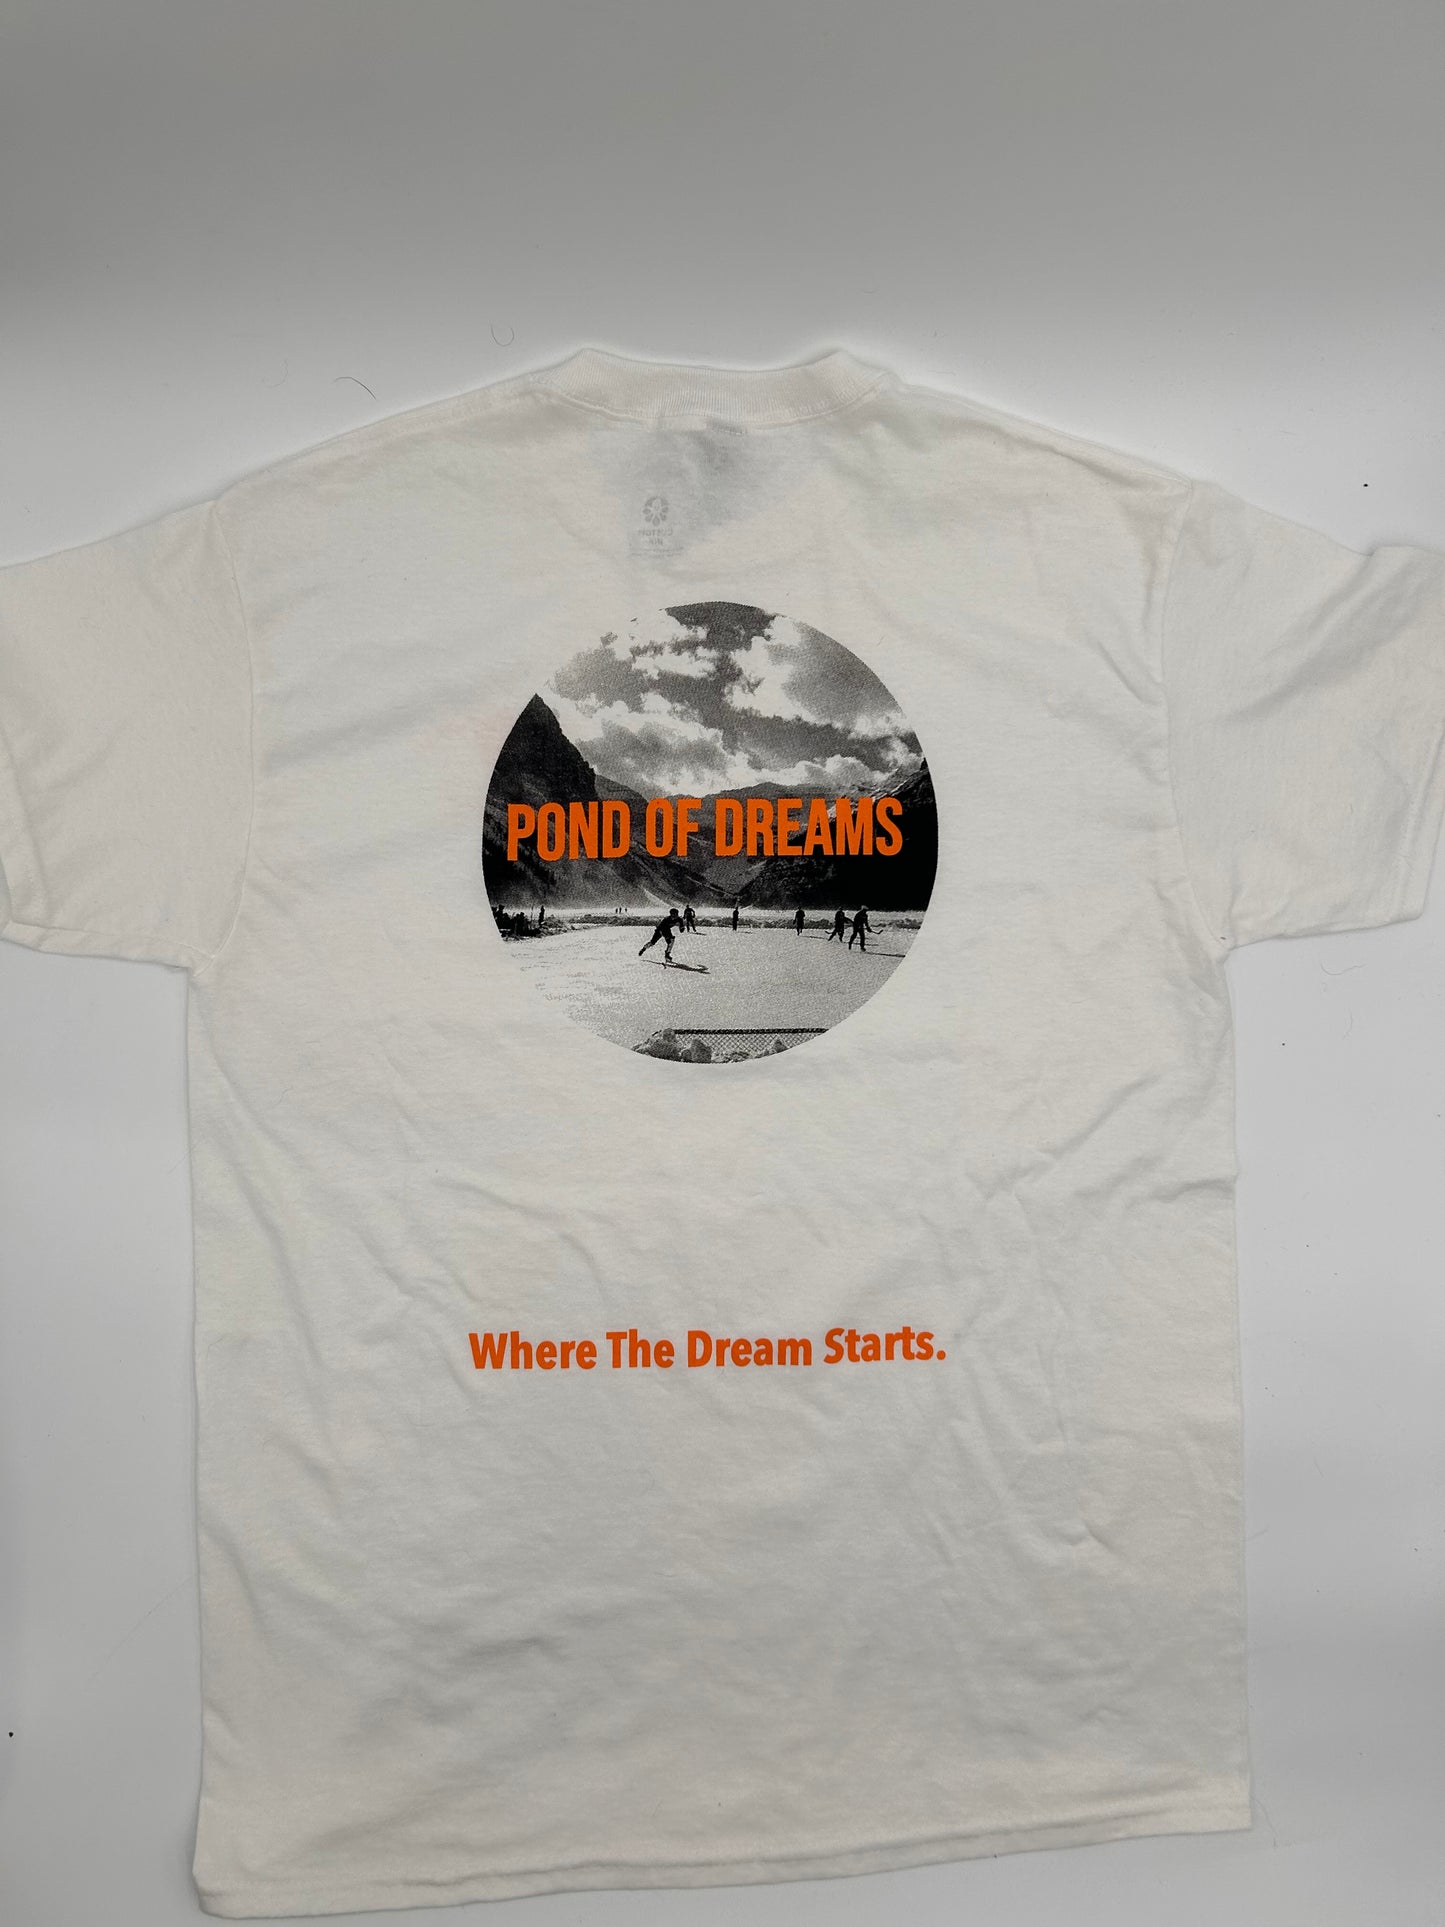 Exclusive Pond of Dreams T-Shirt